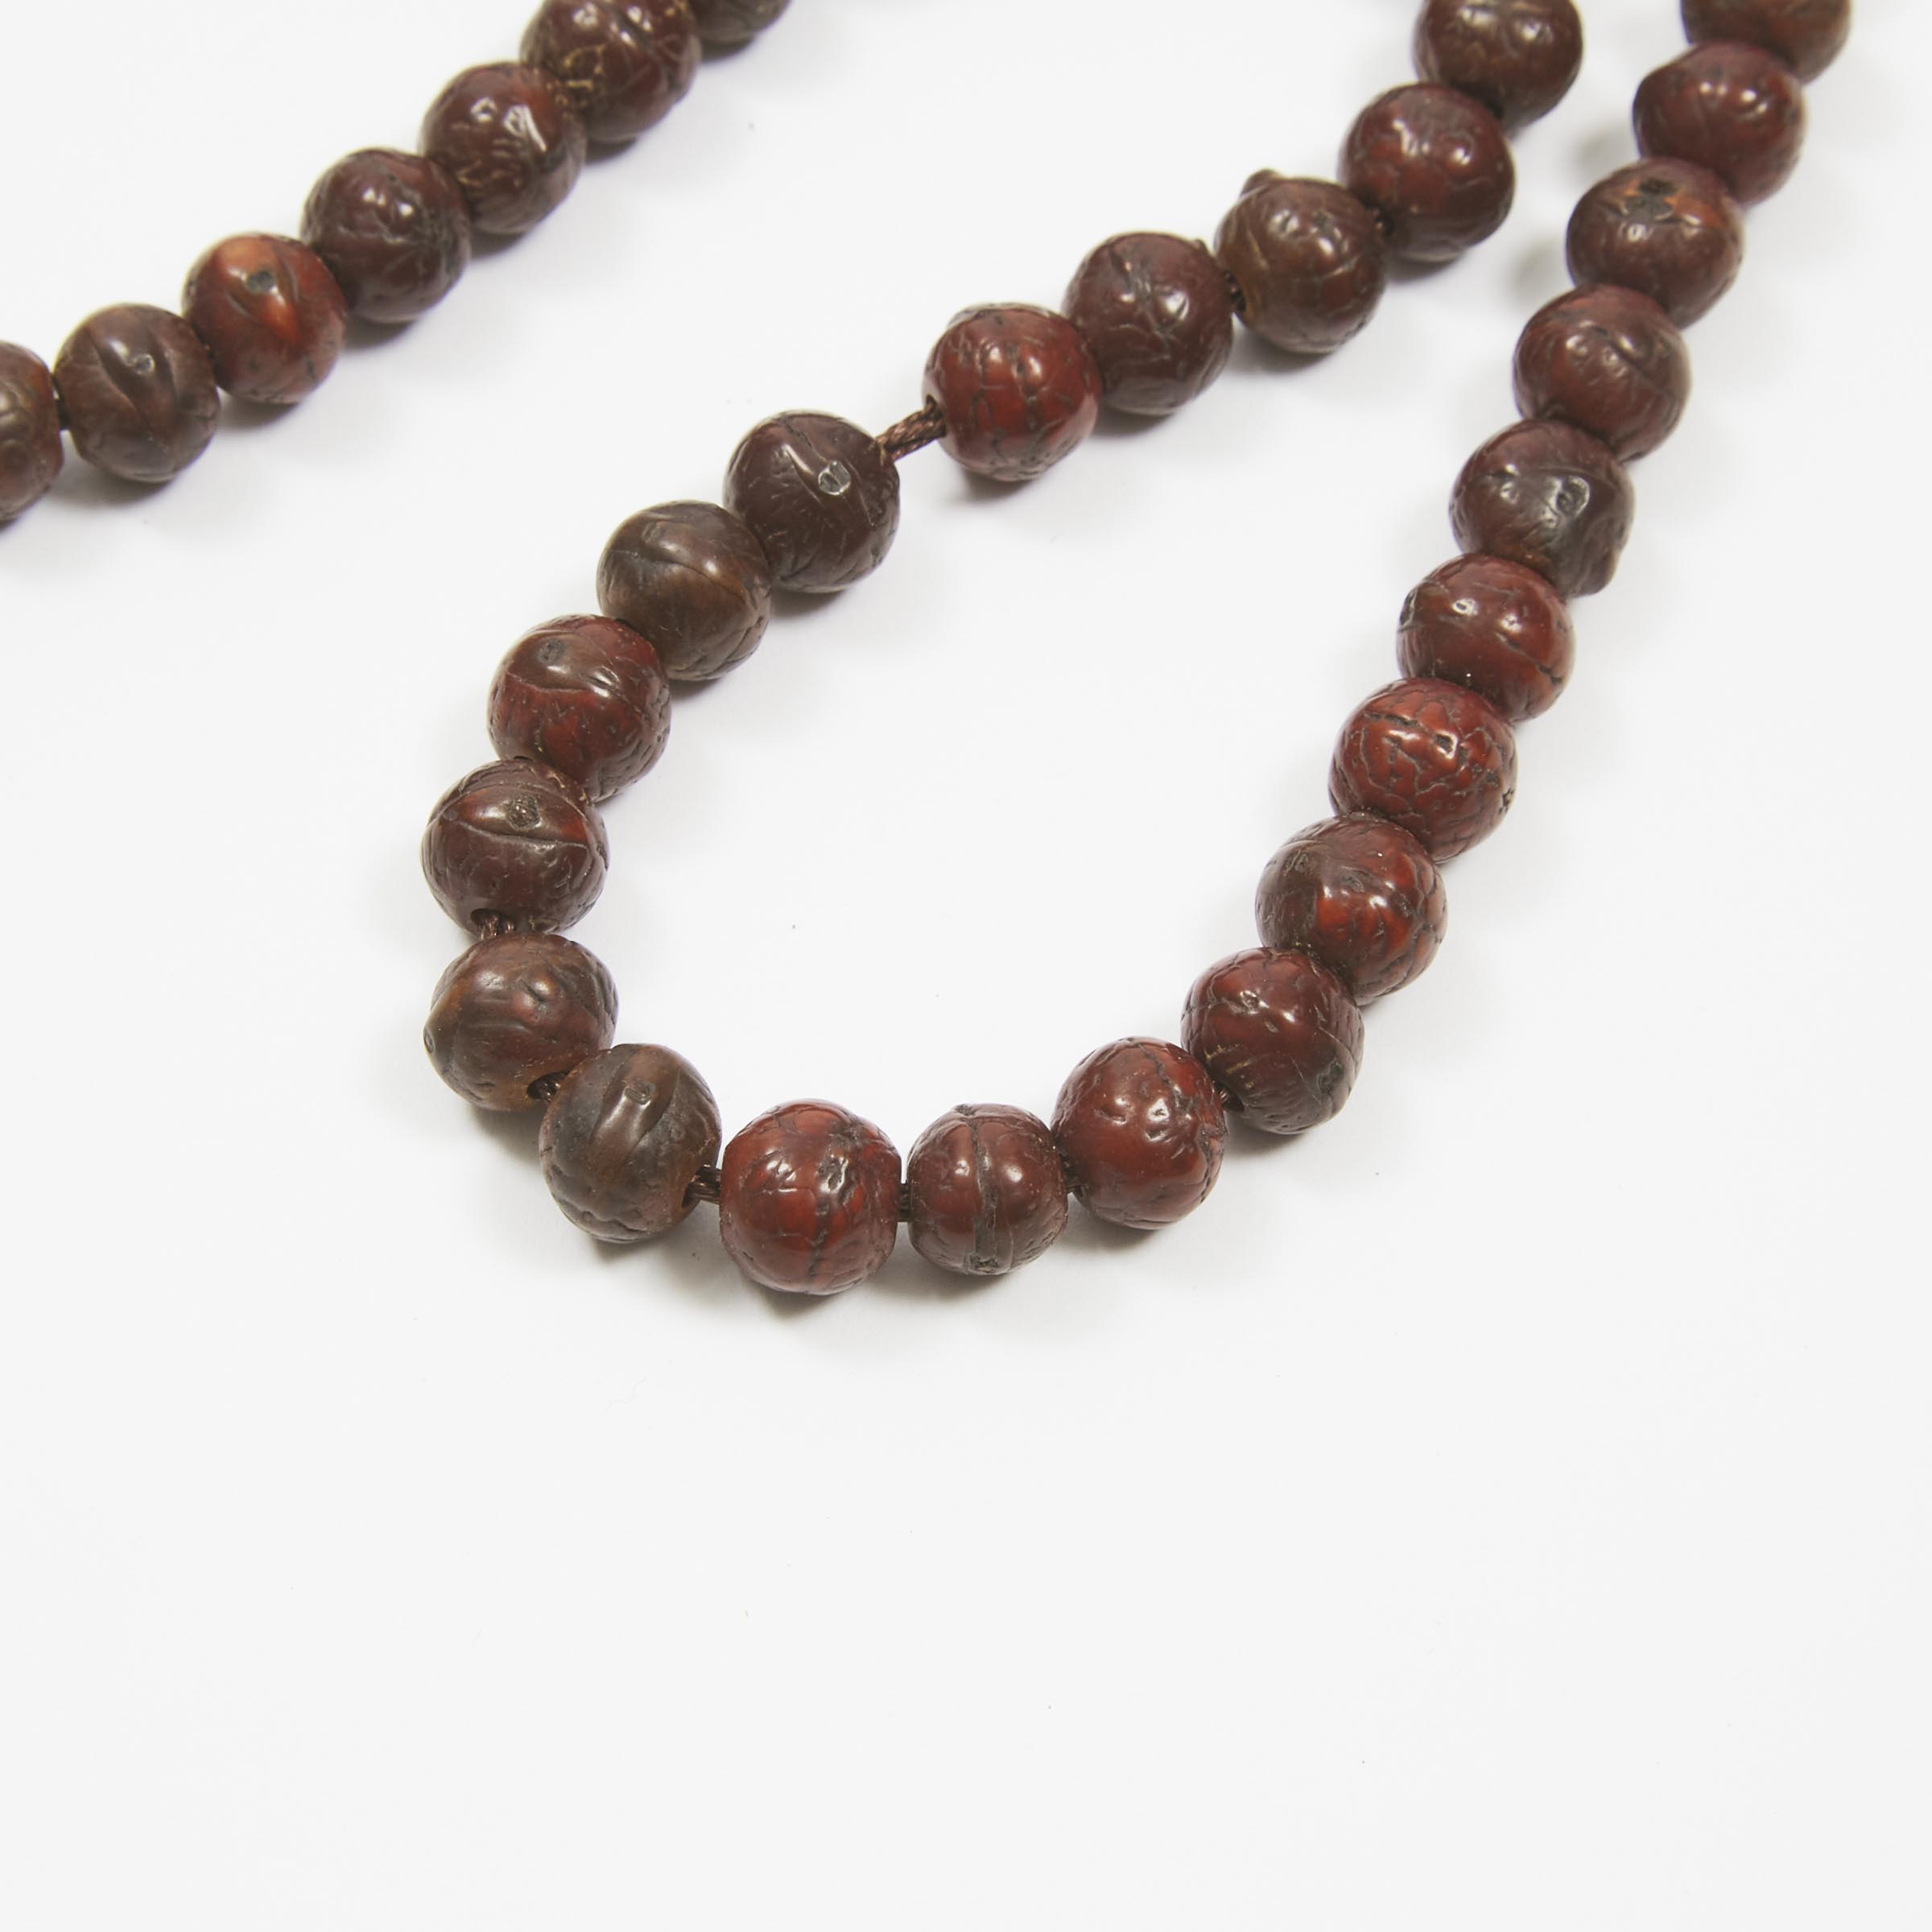 A One Hundred and Eight Bodhi Seed Beaded Necklace, Republican Period, Early 20th Century